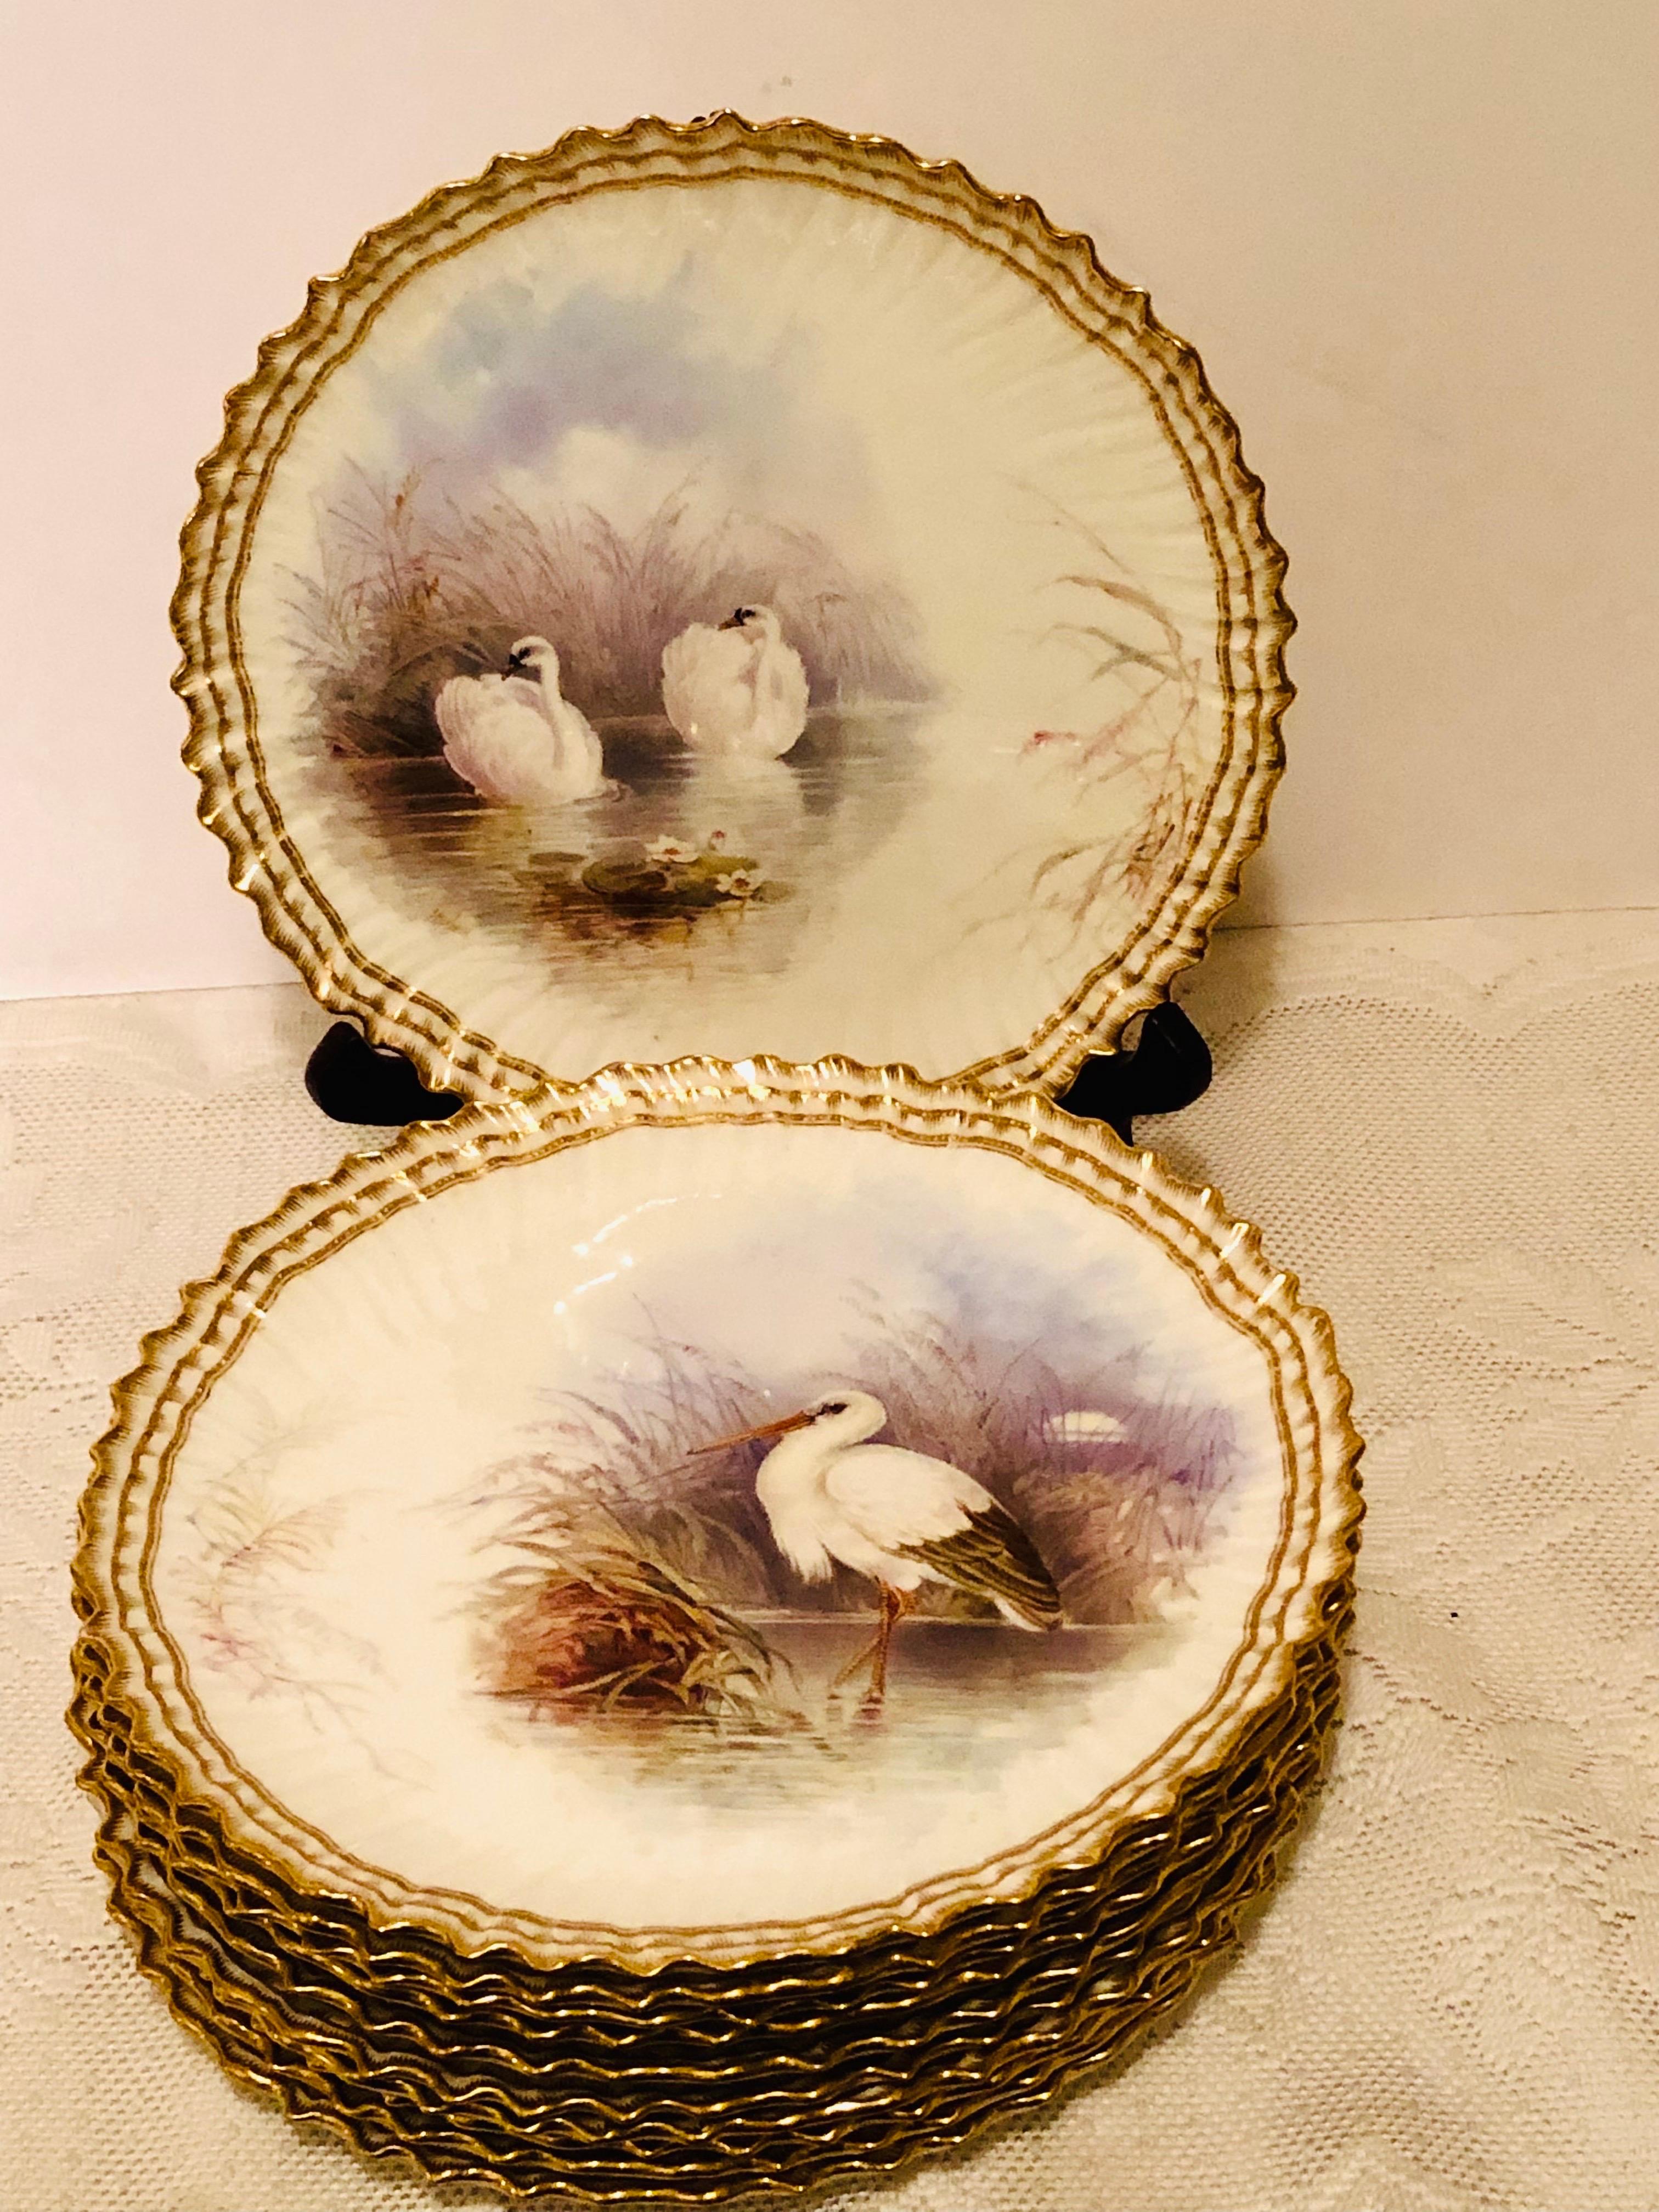 Romantic Set of 11 Cauldon Plates Each Painted Exquisitely With a Different Bird 